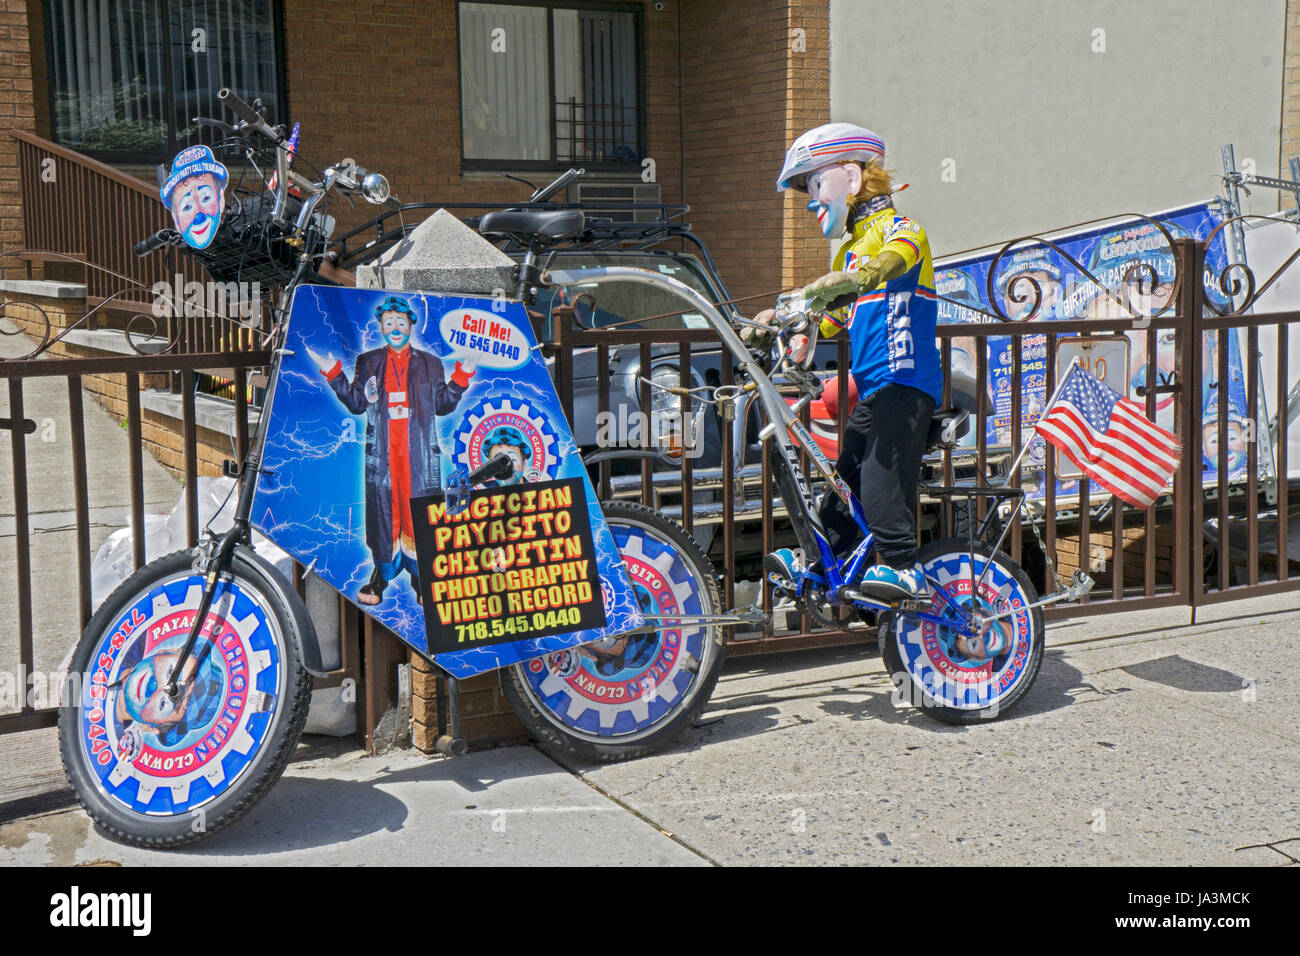 A decorated bicycle with advertisements for Payasito Chiquitin, a Latin American clown. In Astoria, Stock Photo A motorcycle with a sma Stock Photo